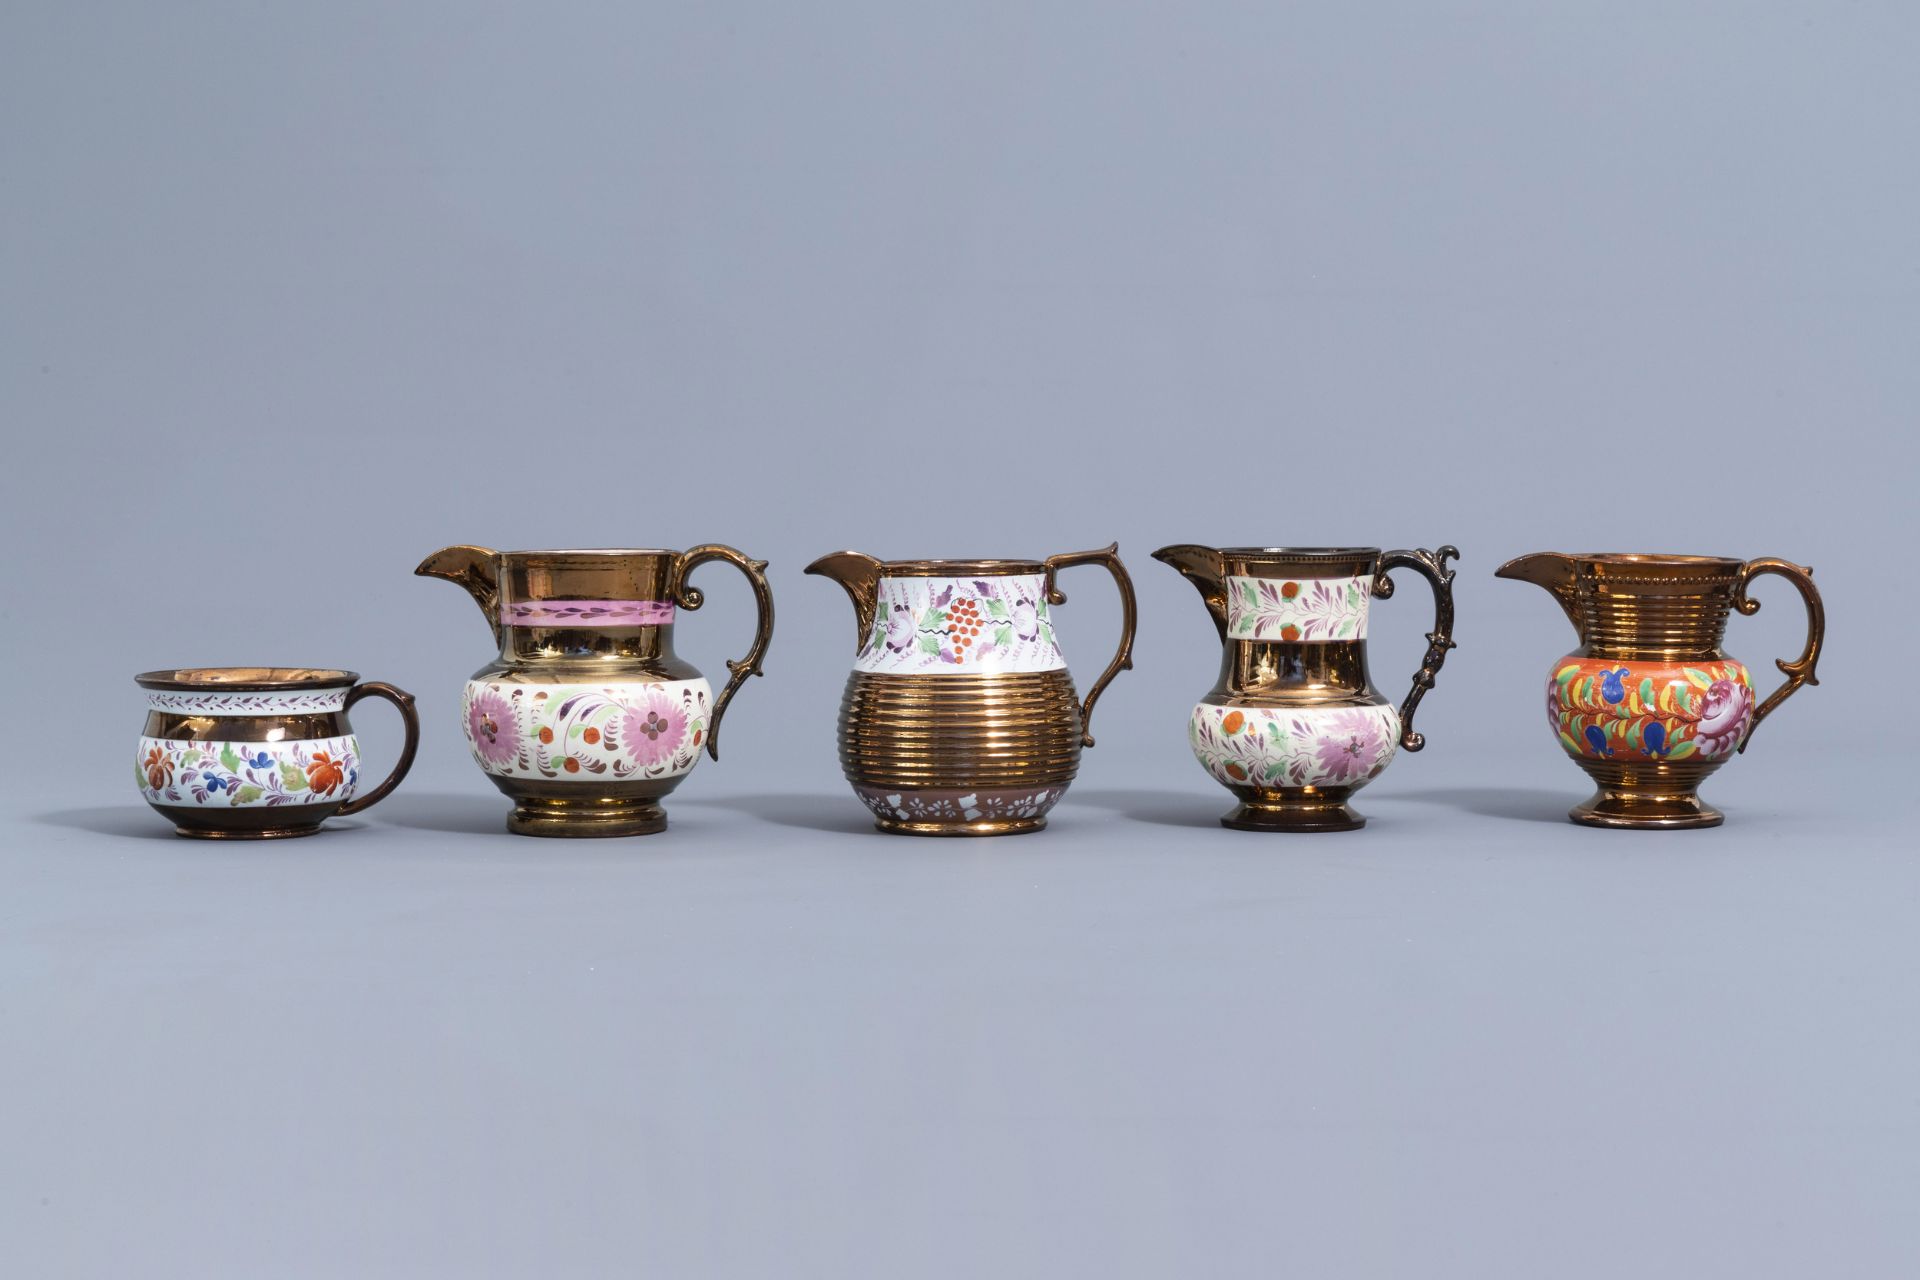 A varied collection of English lustreware items with polychrome floral design, 19th C. - Image 11 of 64